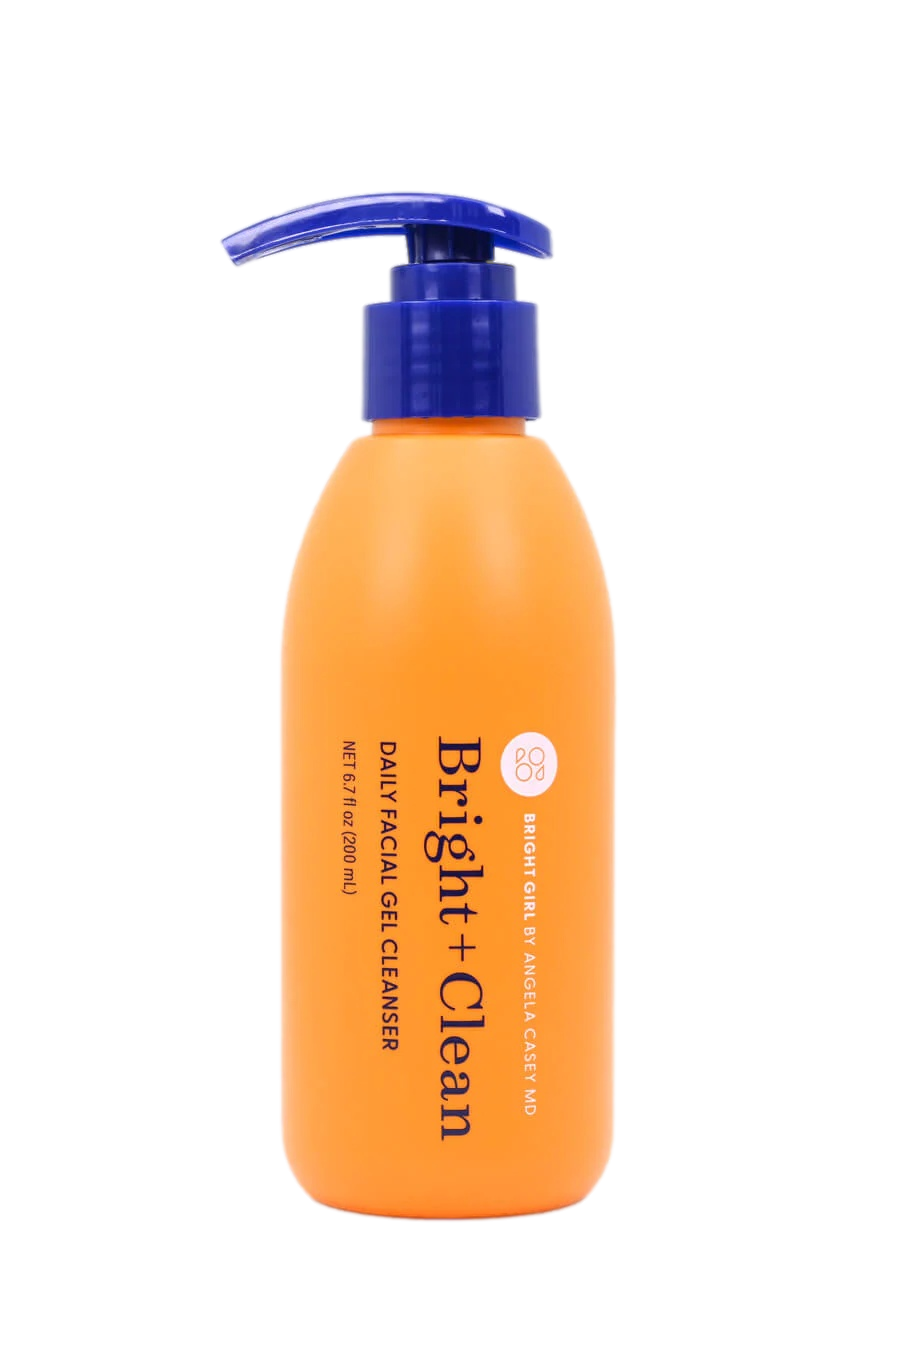 Bright Girl Bright + Clean Daily Facial Gel Cleanser